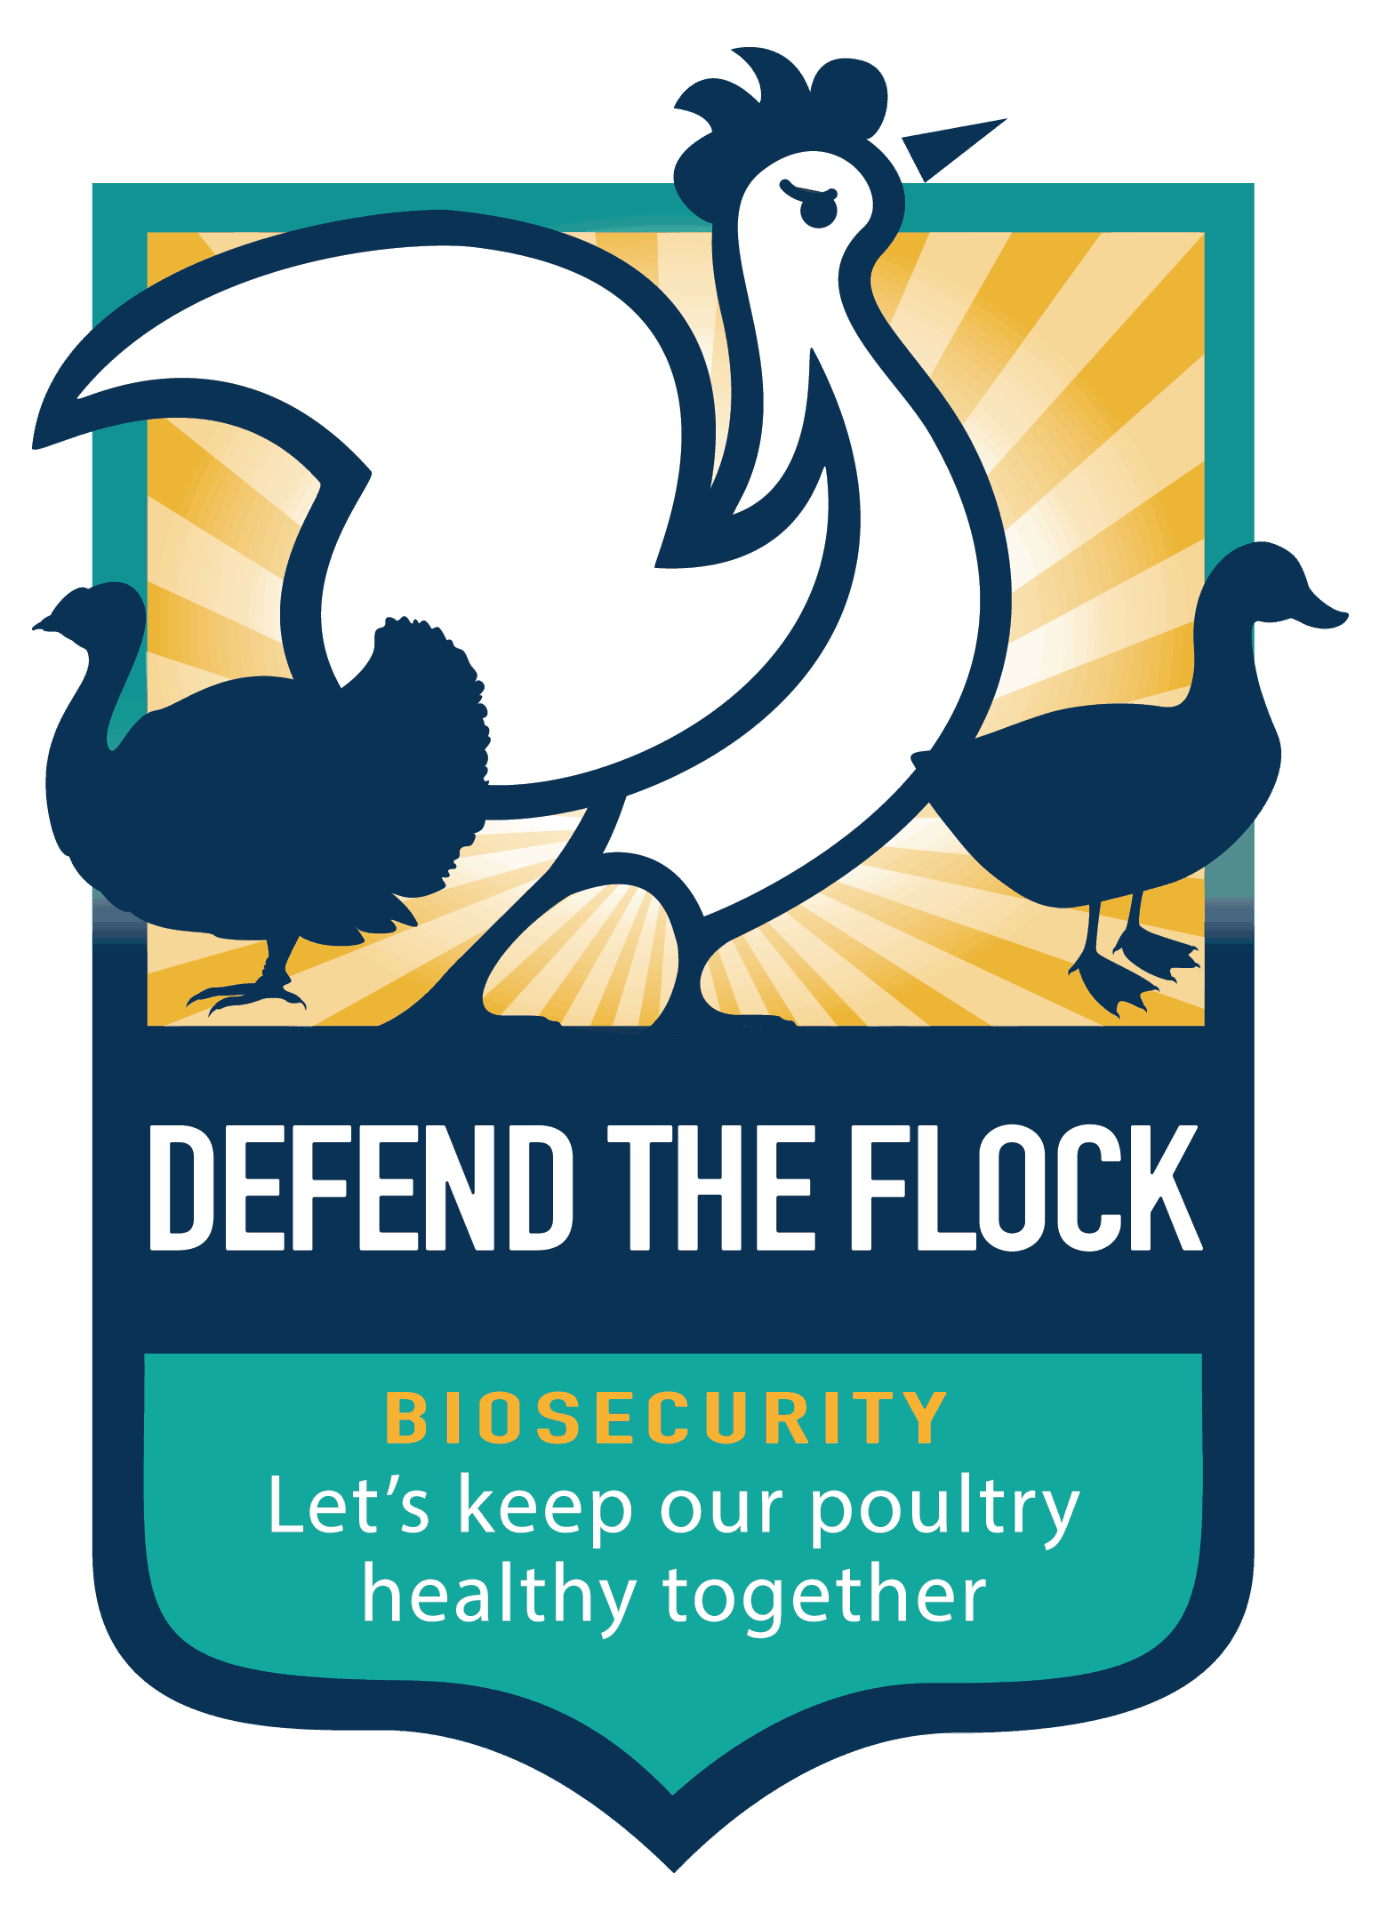 "Defend the Flock" USDA Campaign Aims to Protect Poultry Health